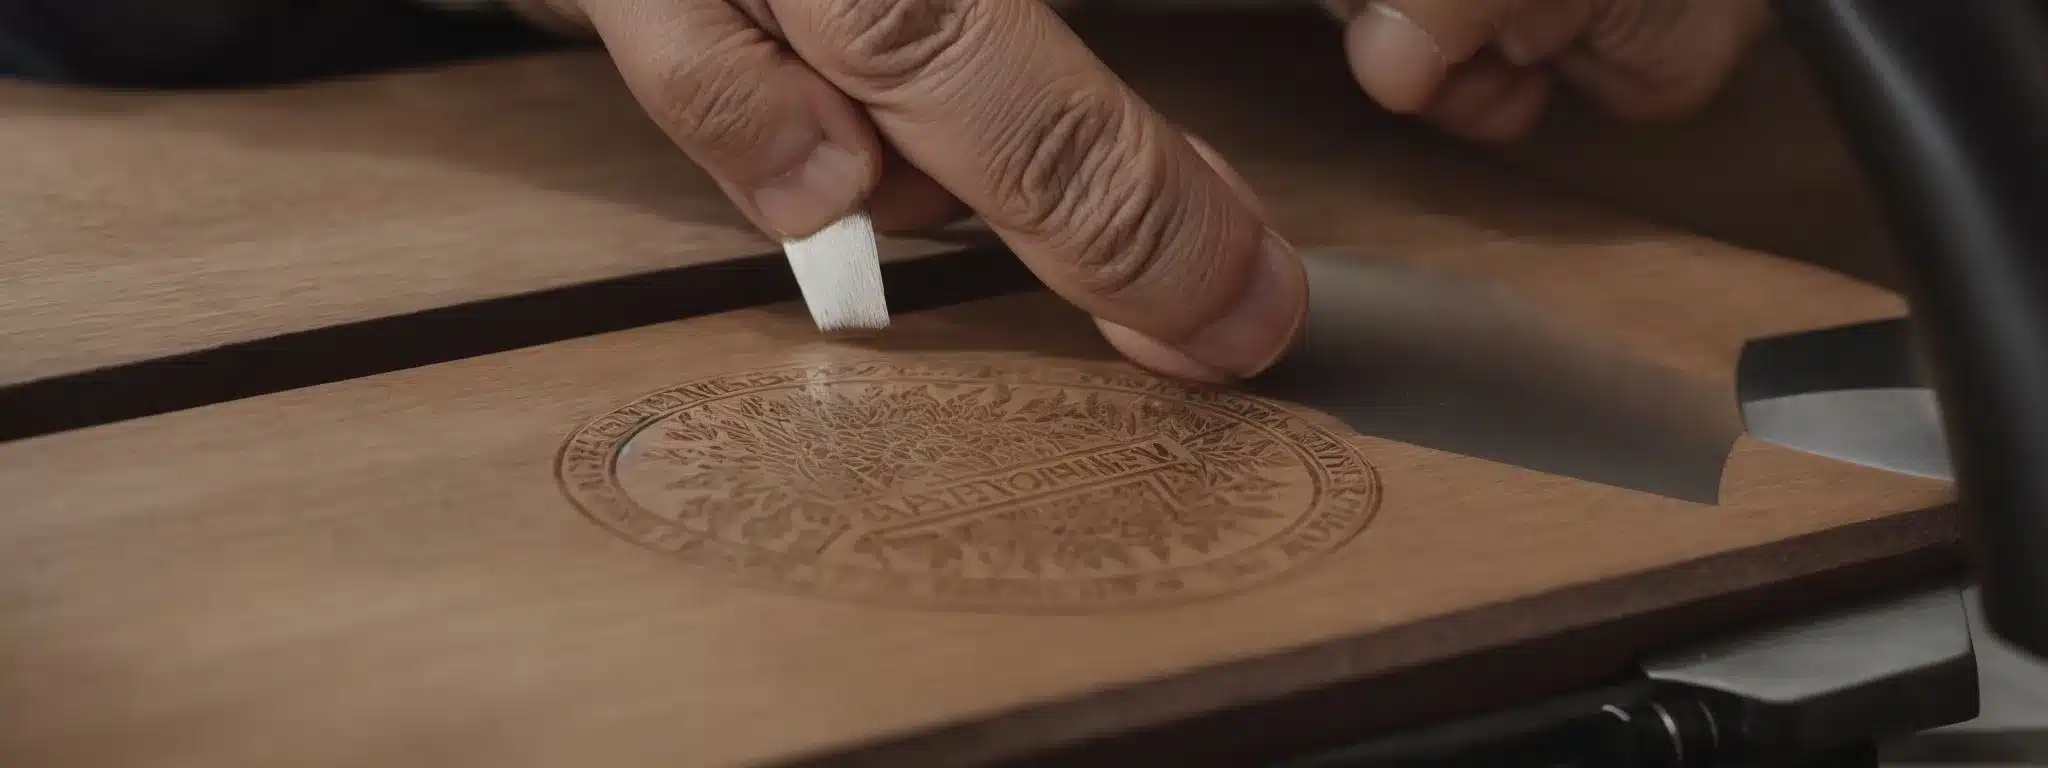 A Craftsman Diligently Etching A Brand'S Emblem Into Wood To Symbolize Meticulous, Authentic Branding Efforts.